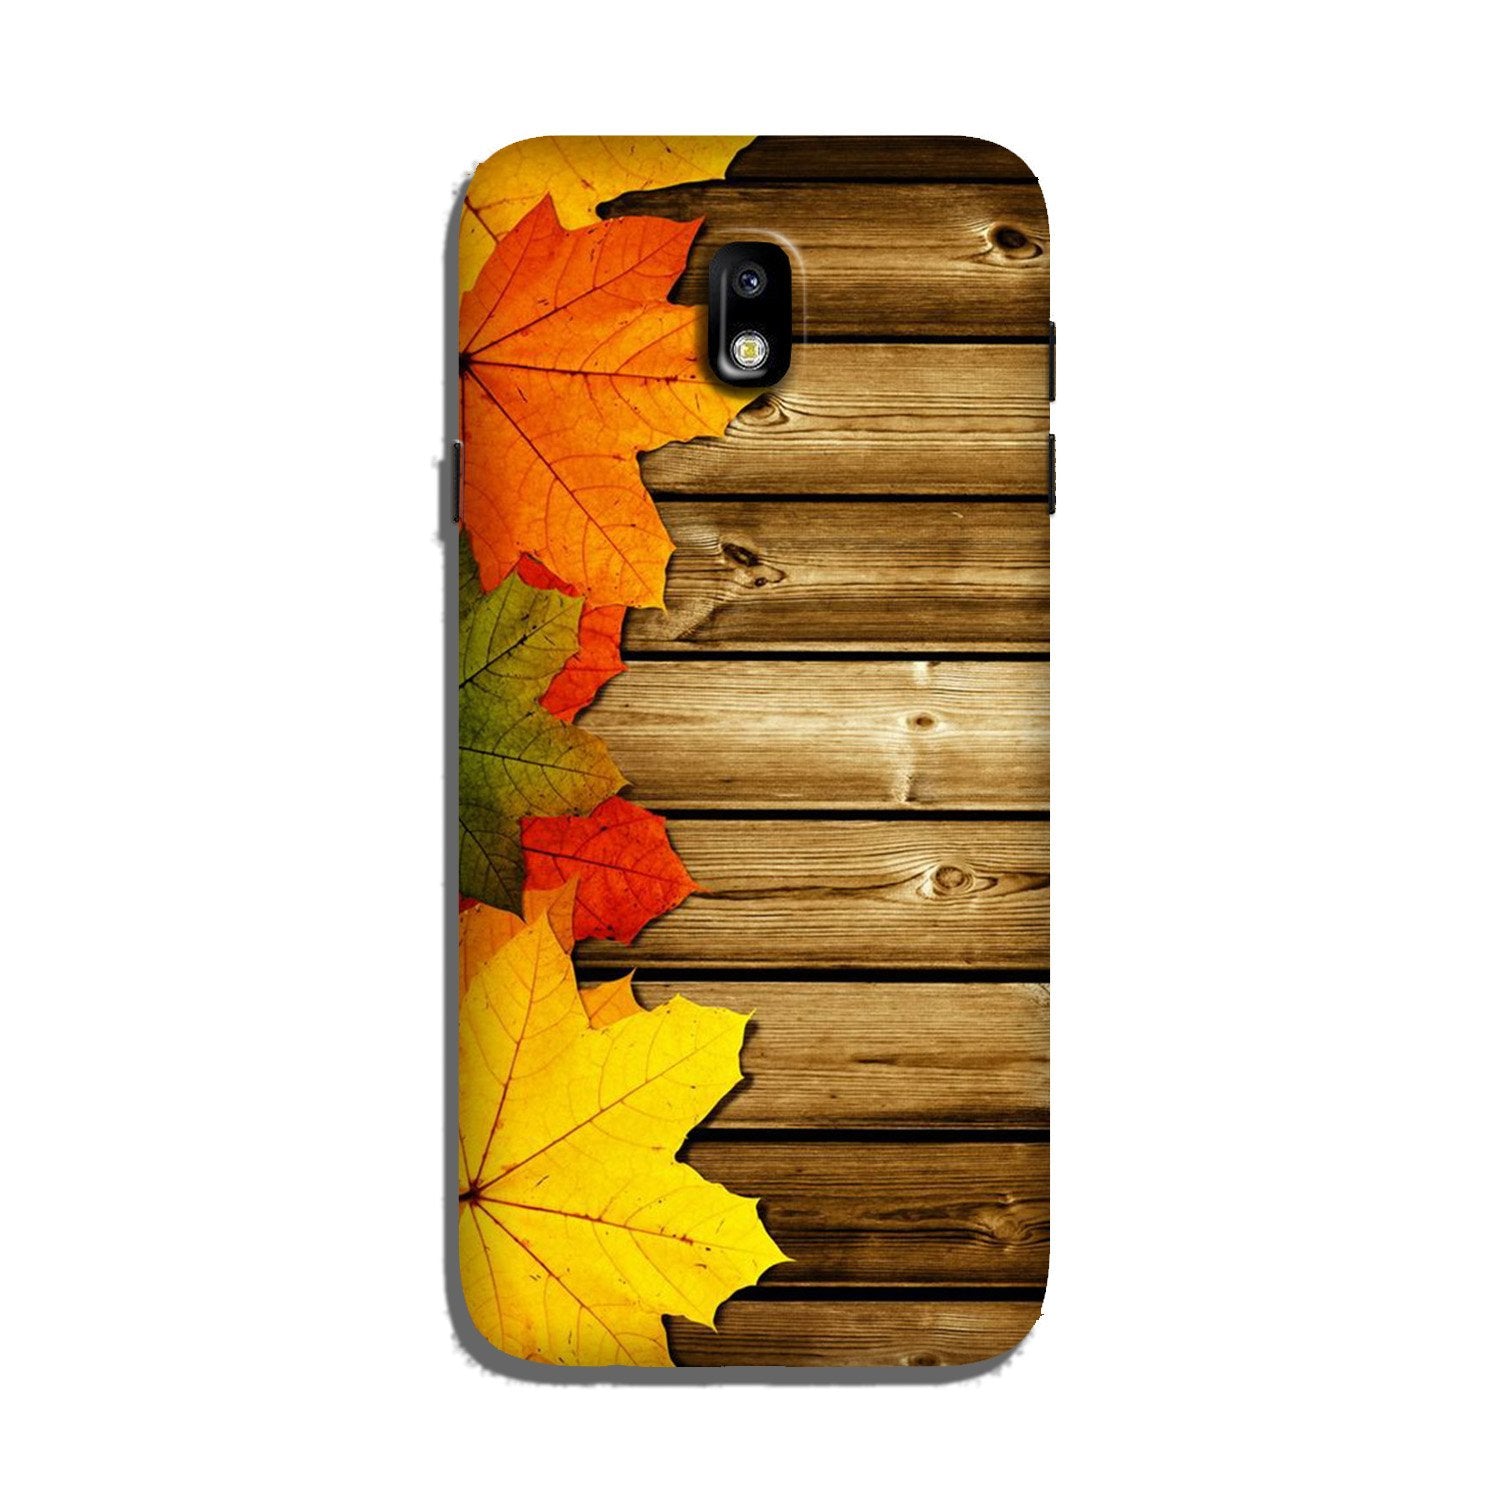 Wooden look3 Case for Galaxy J5 Pro